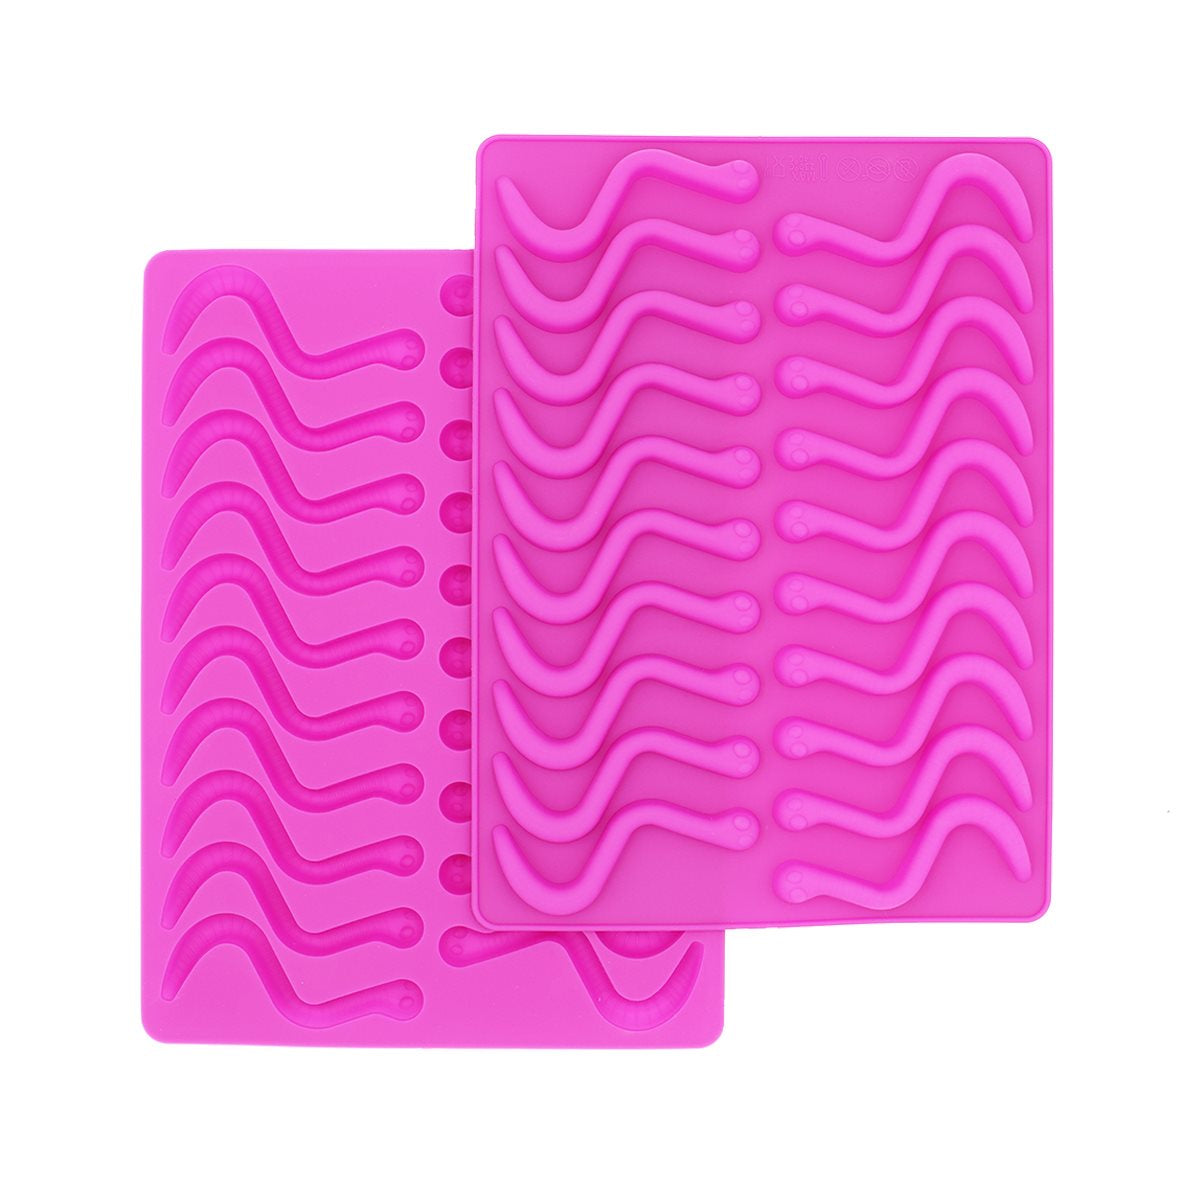 Silicone Gummy Worm Mold - 2 Pack